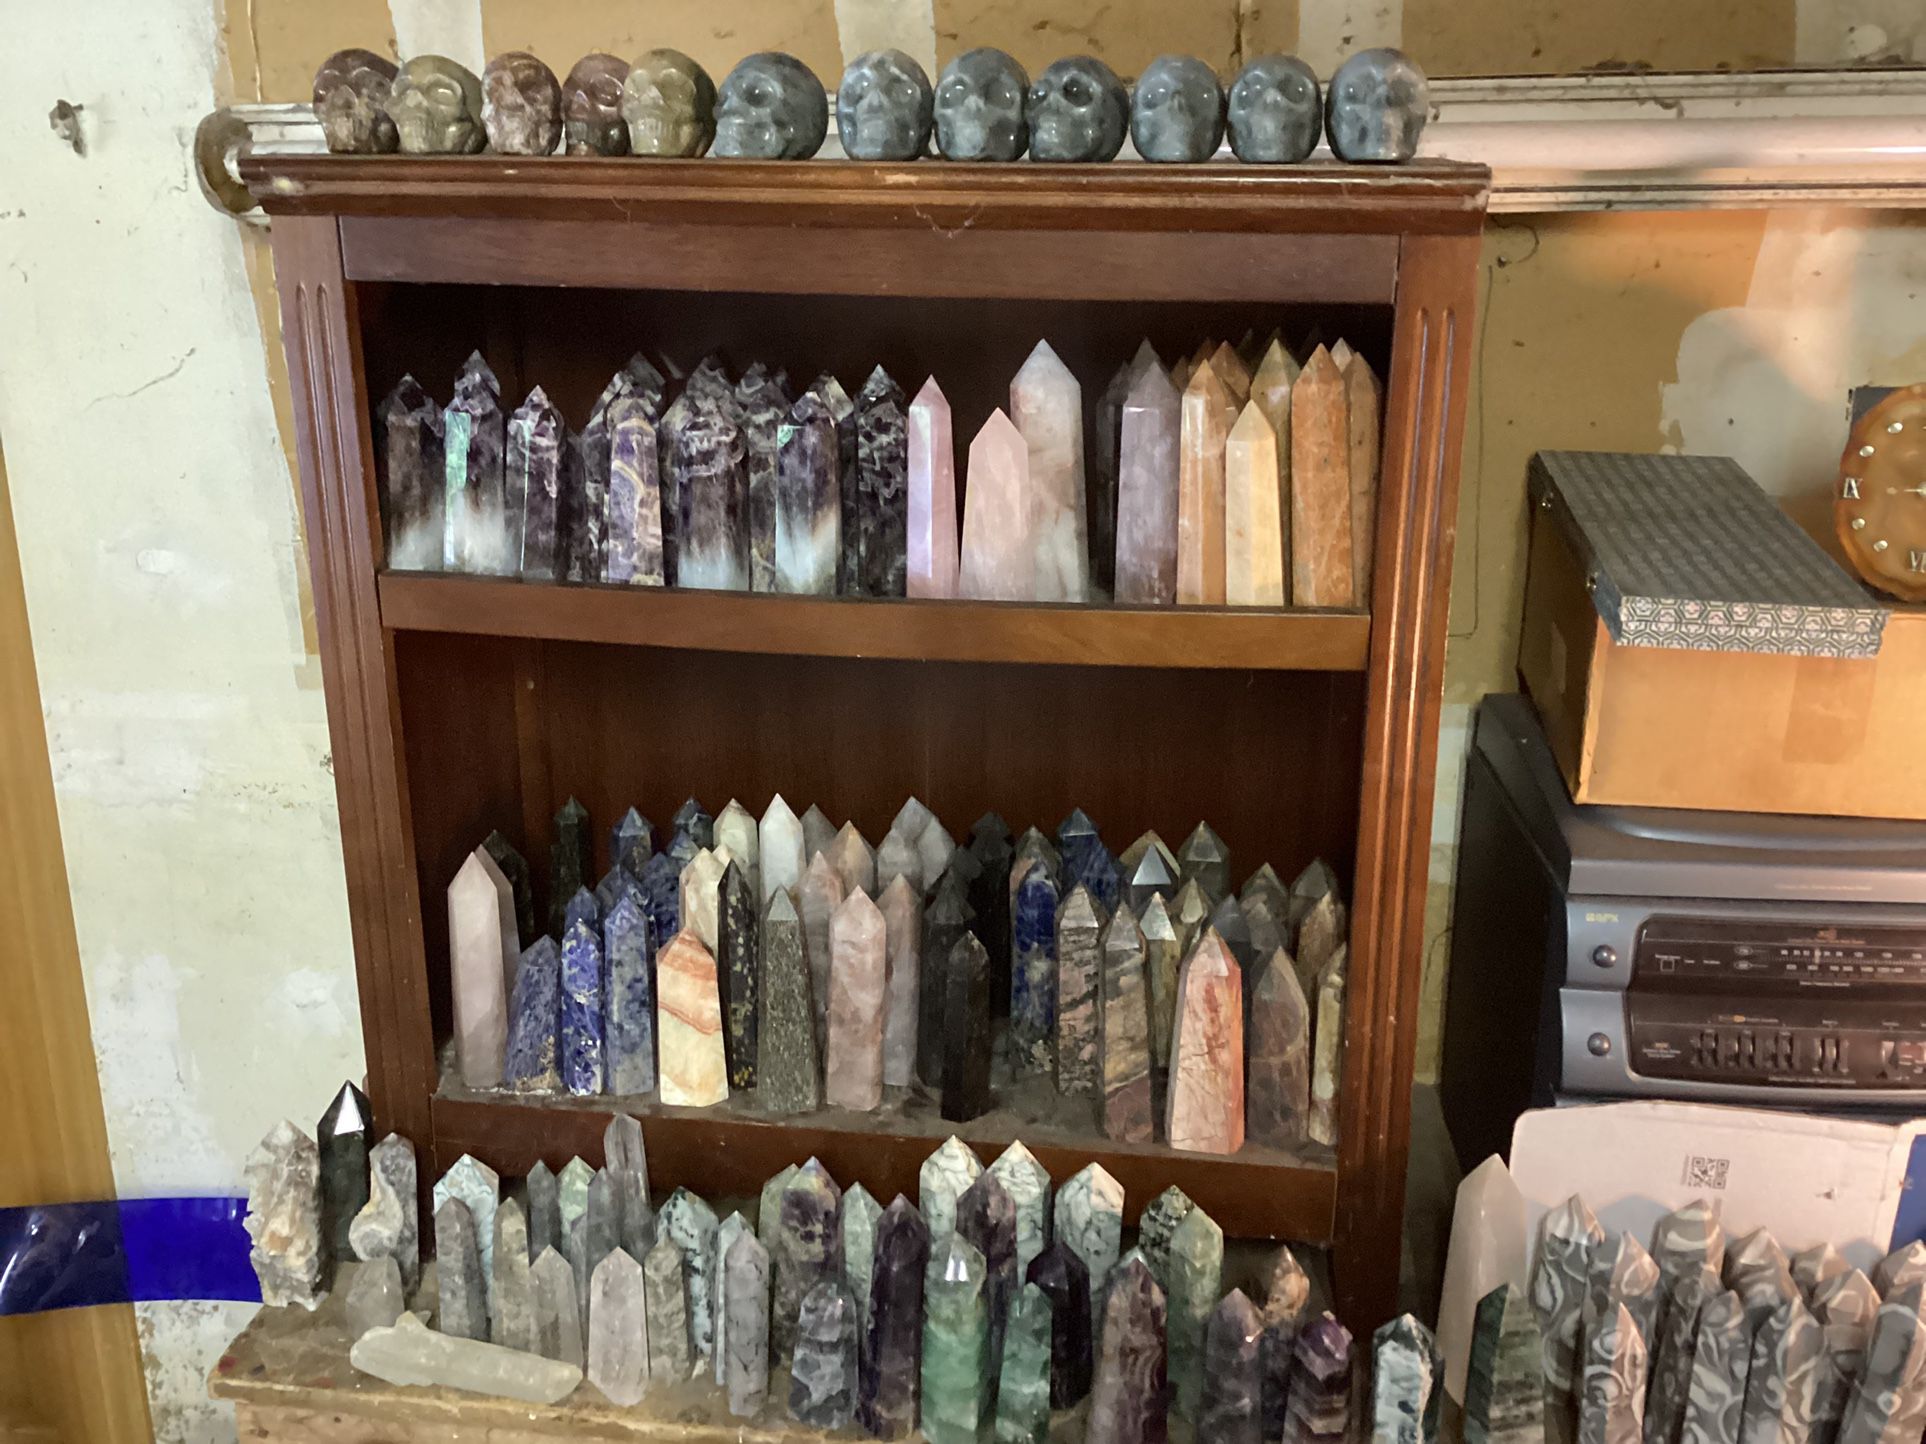 Rock Collection Over $50,000 Worth Of Beautiful Rocks and Crystals -  antiques - by owner - collectibles sale 